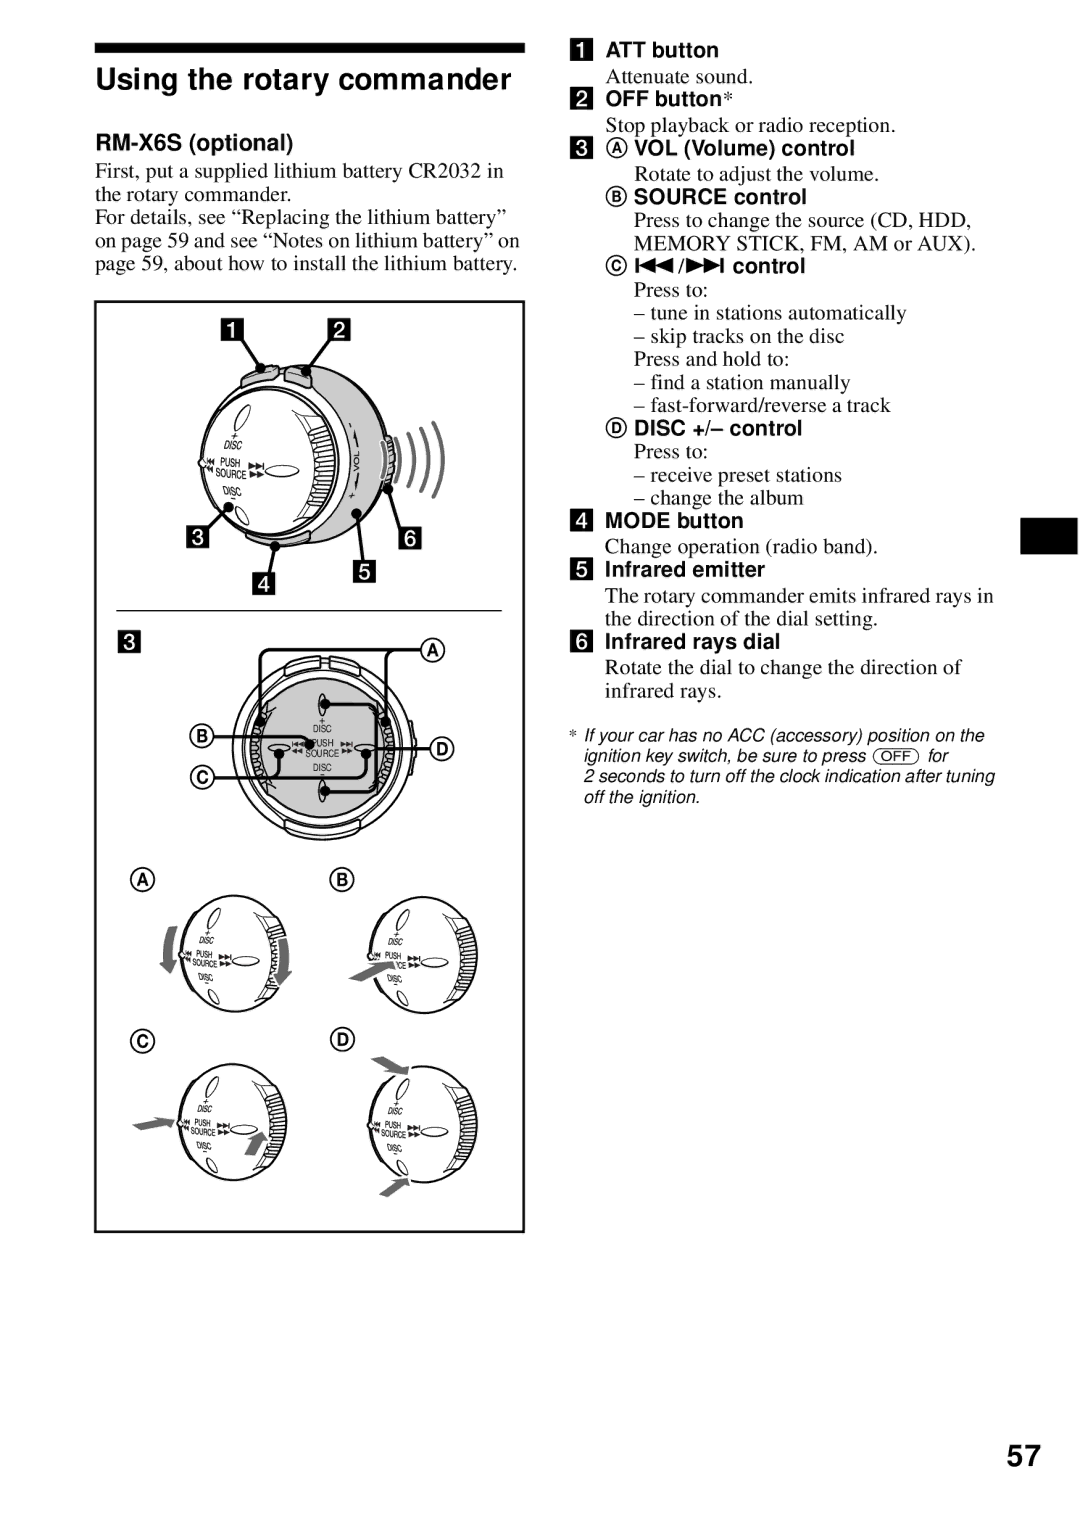 Sony MEX-1HD operating instructions Using the rotary commander, RM-X6S optional 